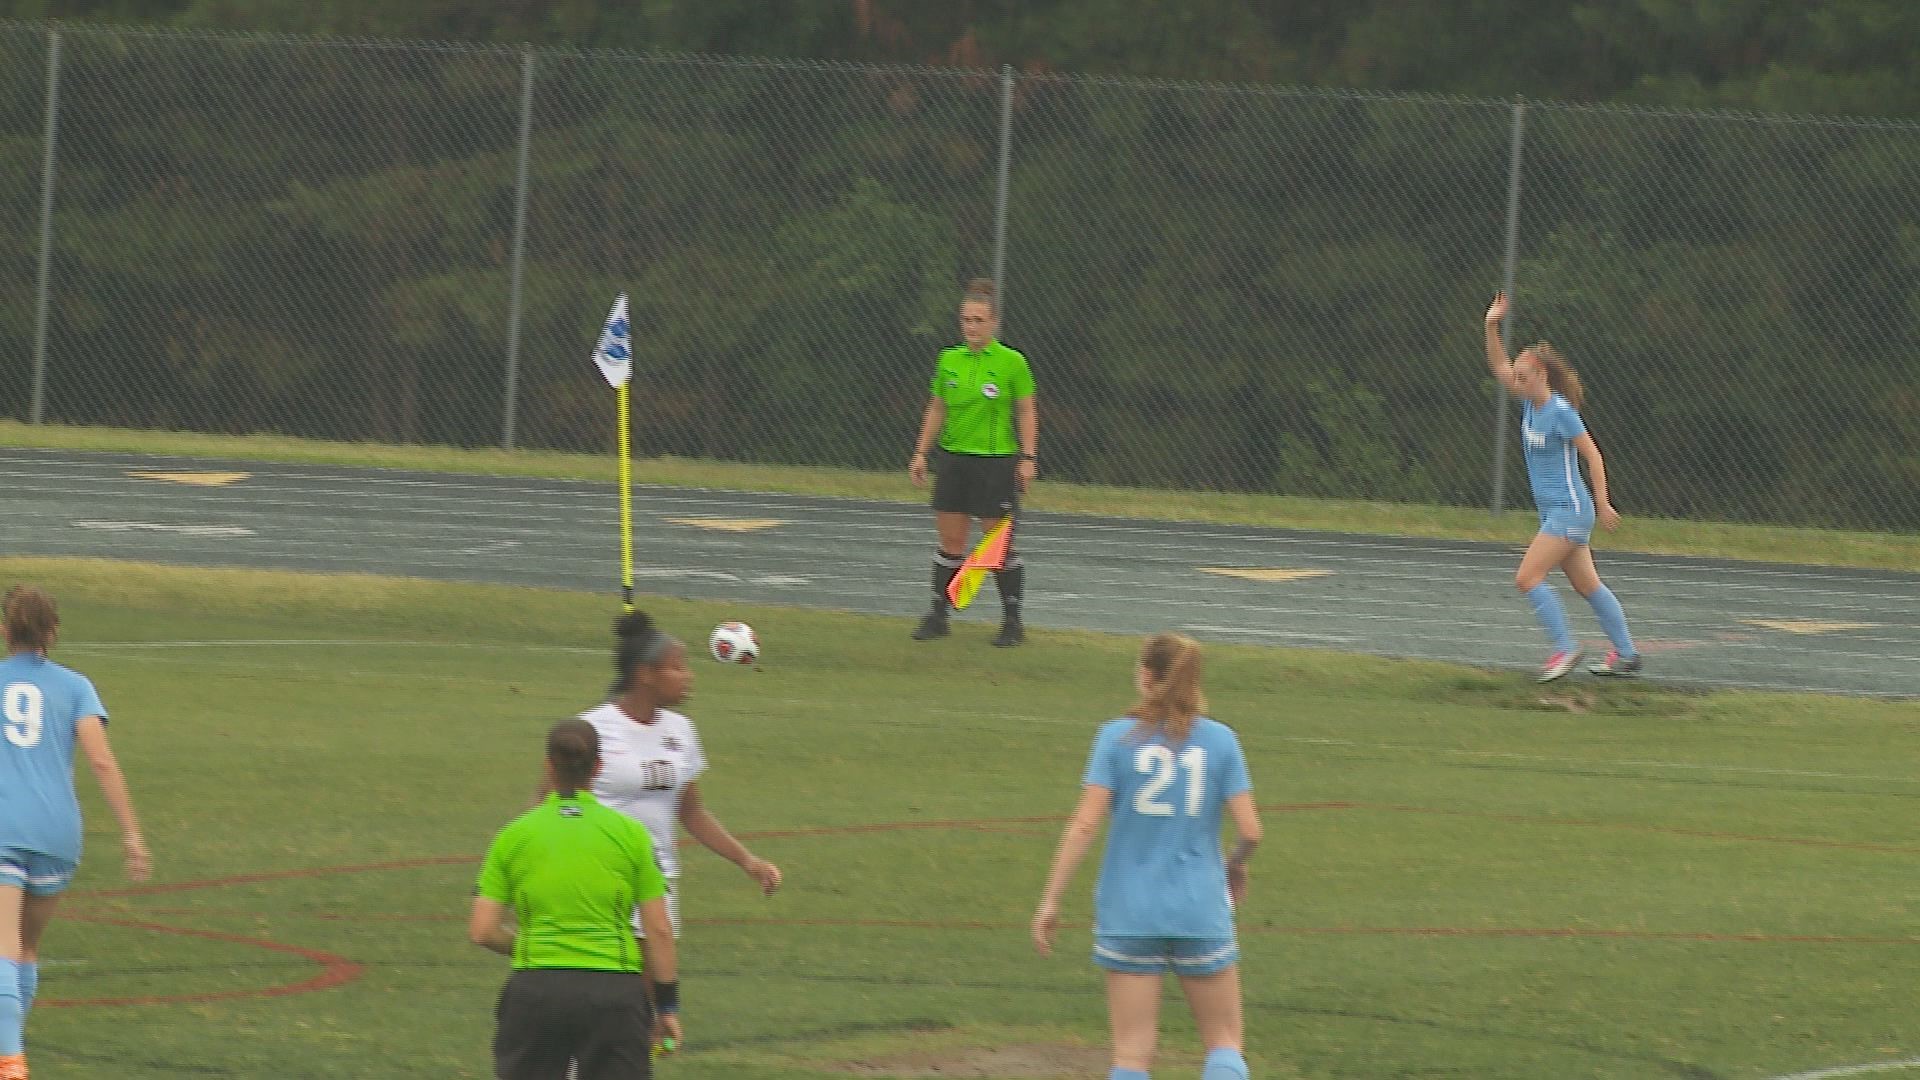 Soccer played through the rain in the state semifinals. Baseball and softball postponed.